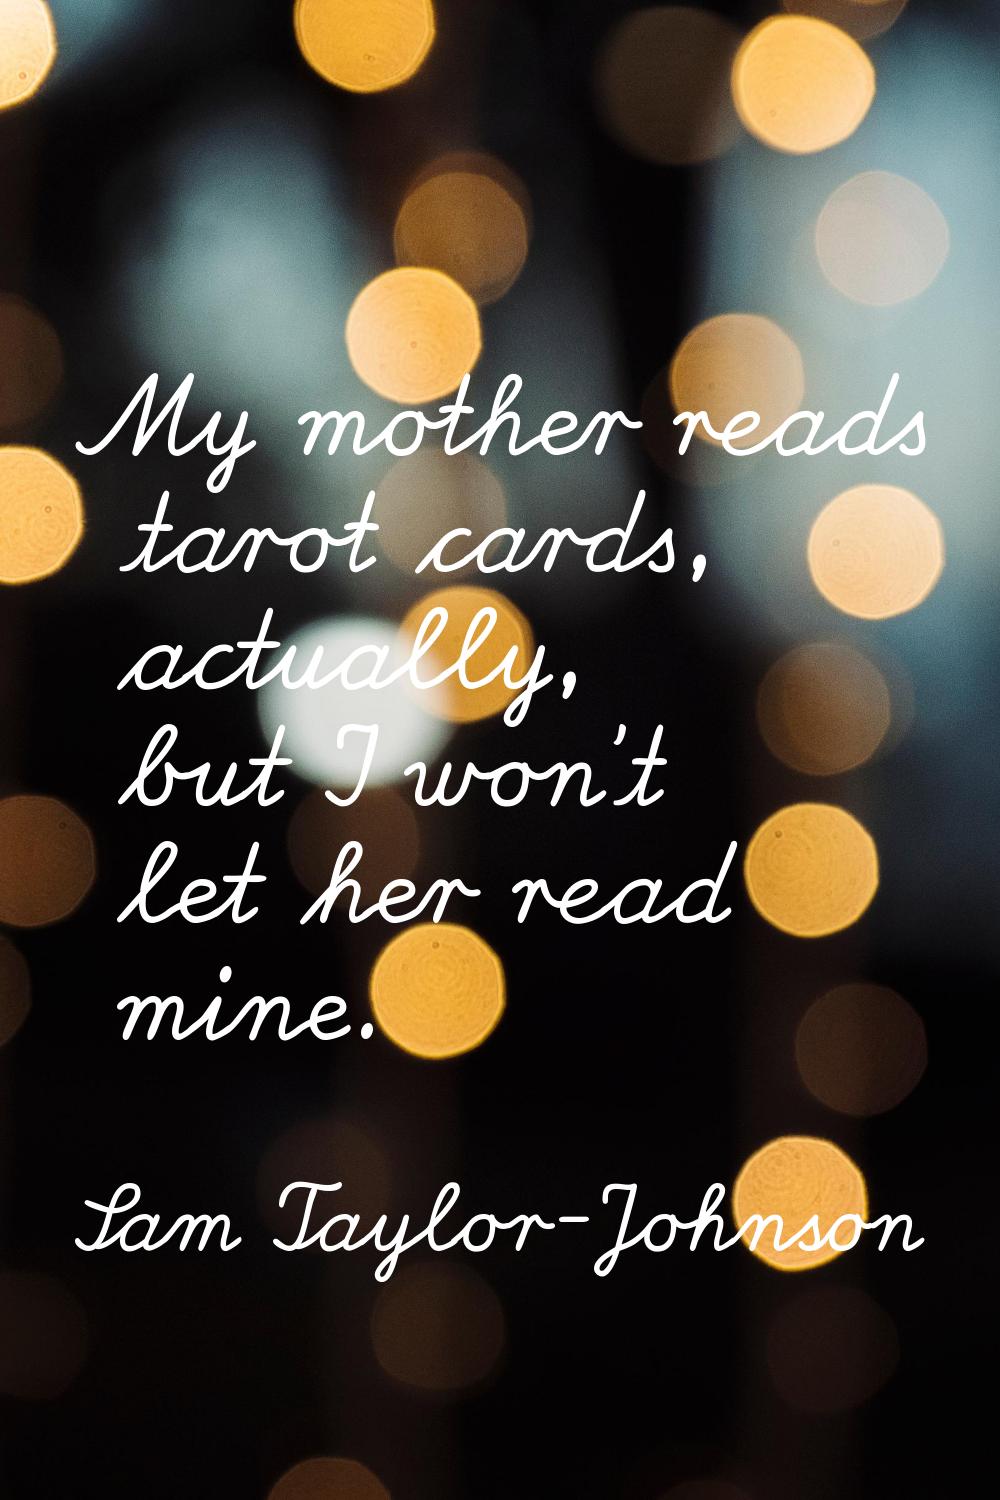 My mother reads tarot cards, actually, but I won't let her read mine.